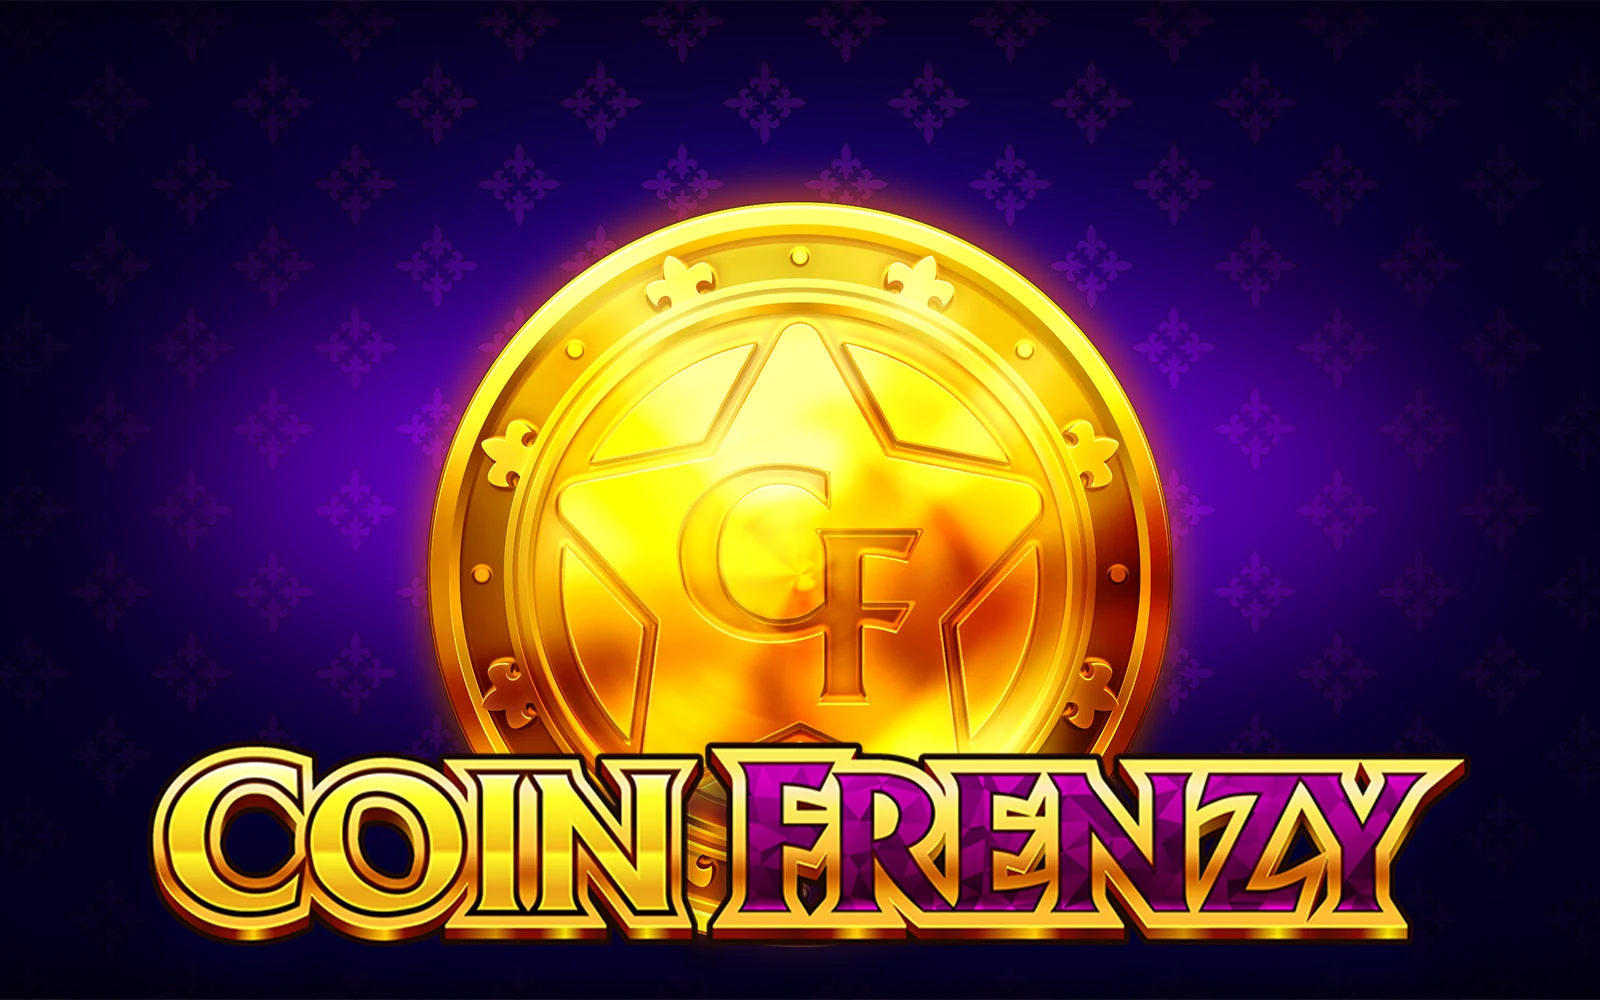 Play Coin Frenzy on Starcasino.be online casino